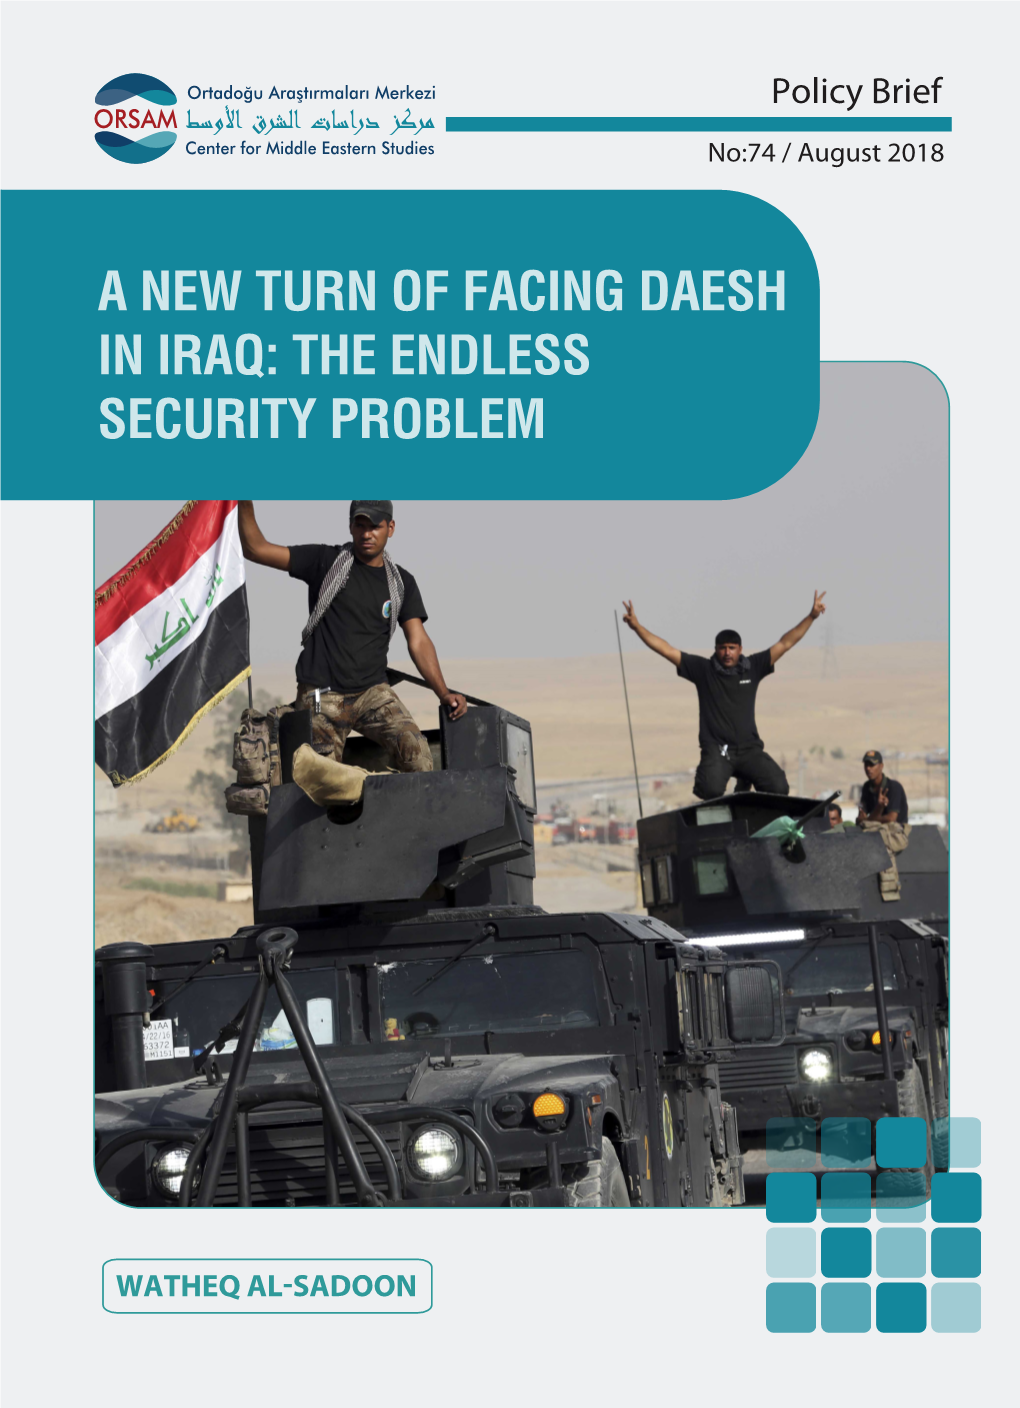 A New Turn of Facing Daesh in Iraq: the Endless Security Problem